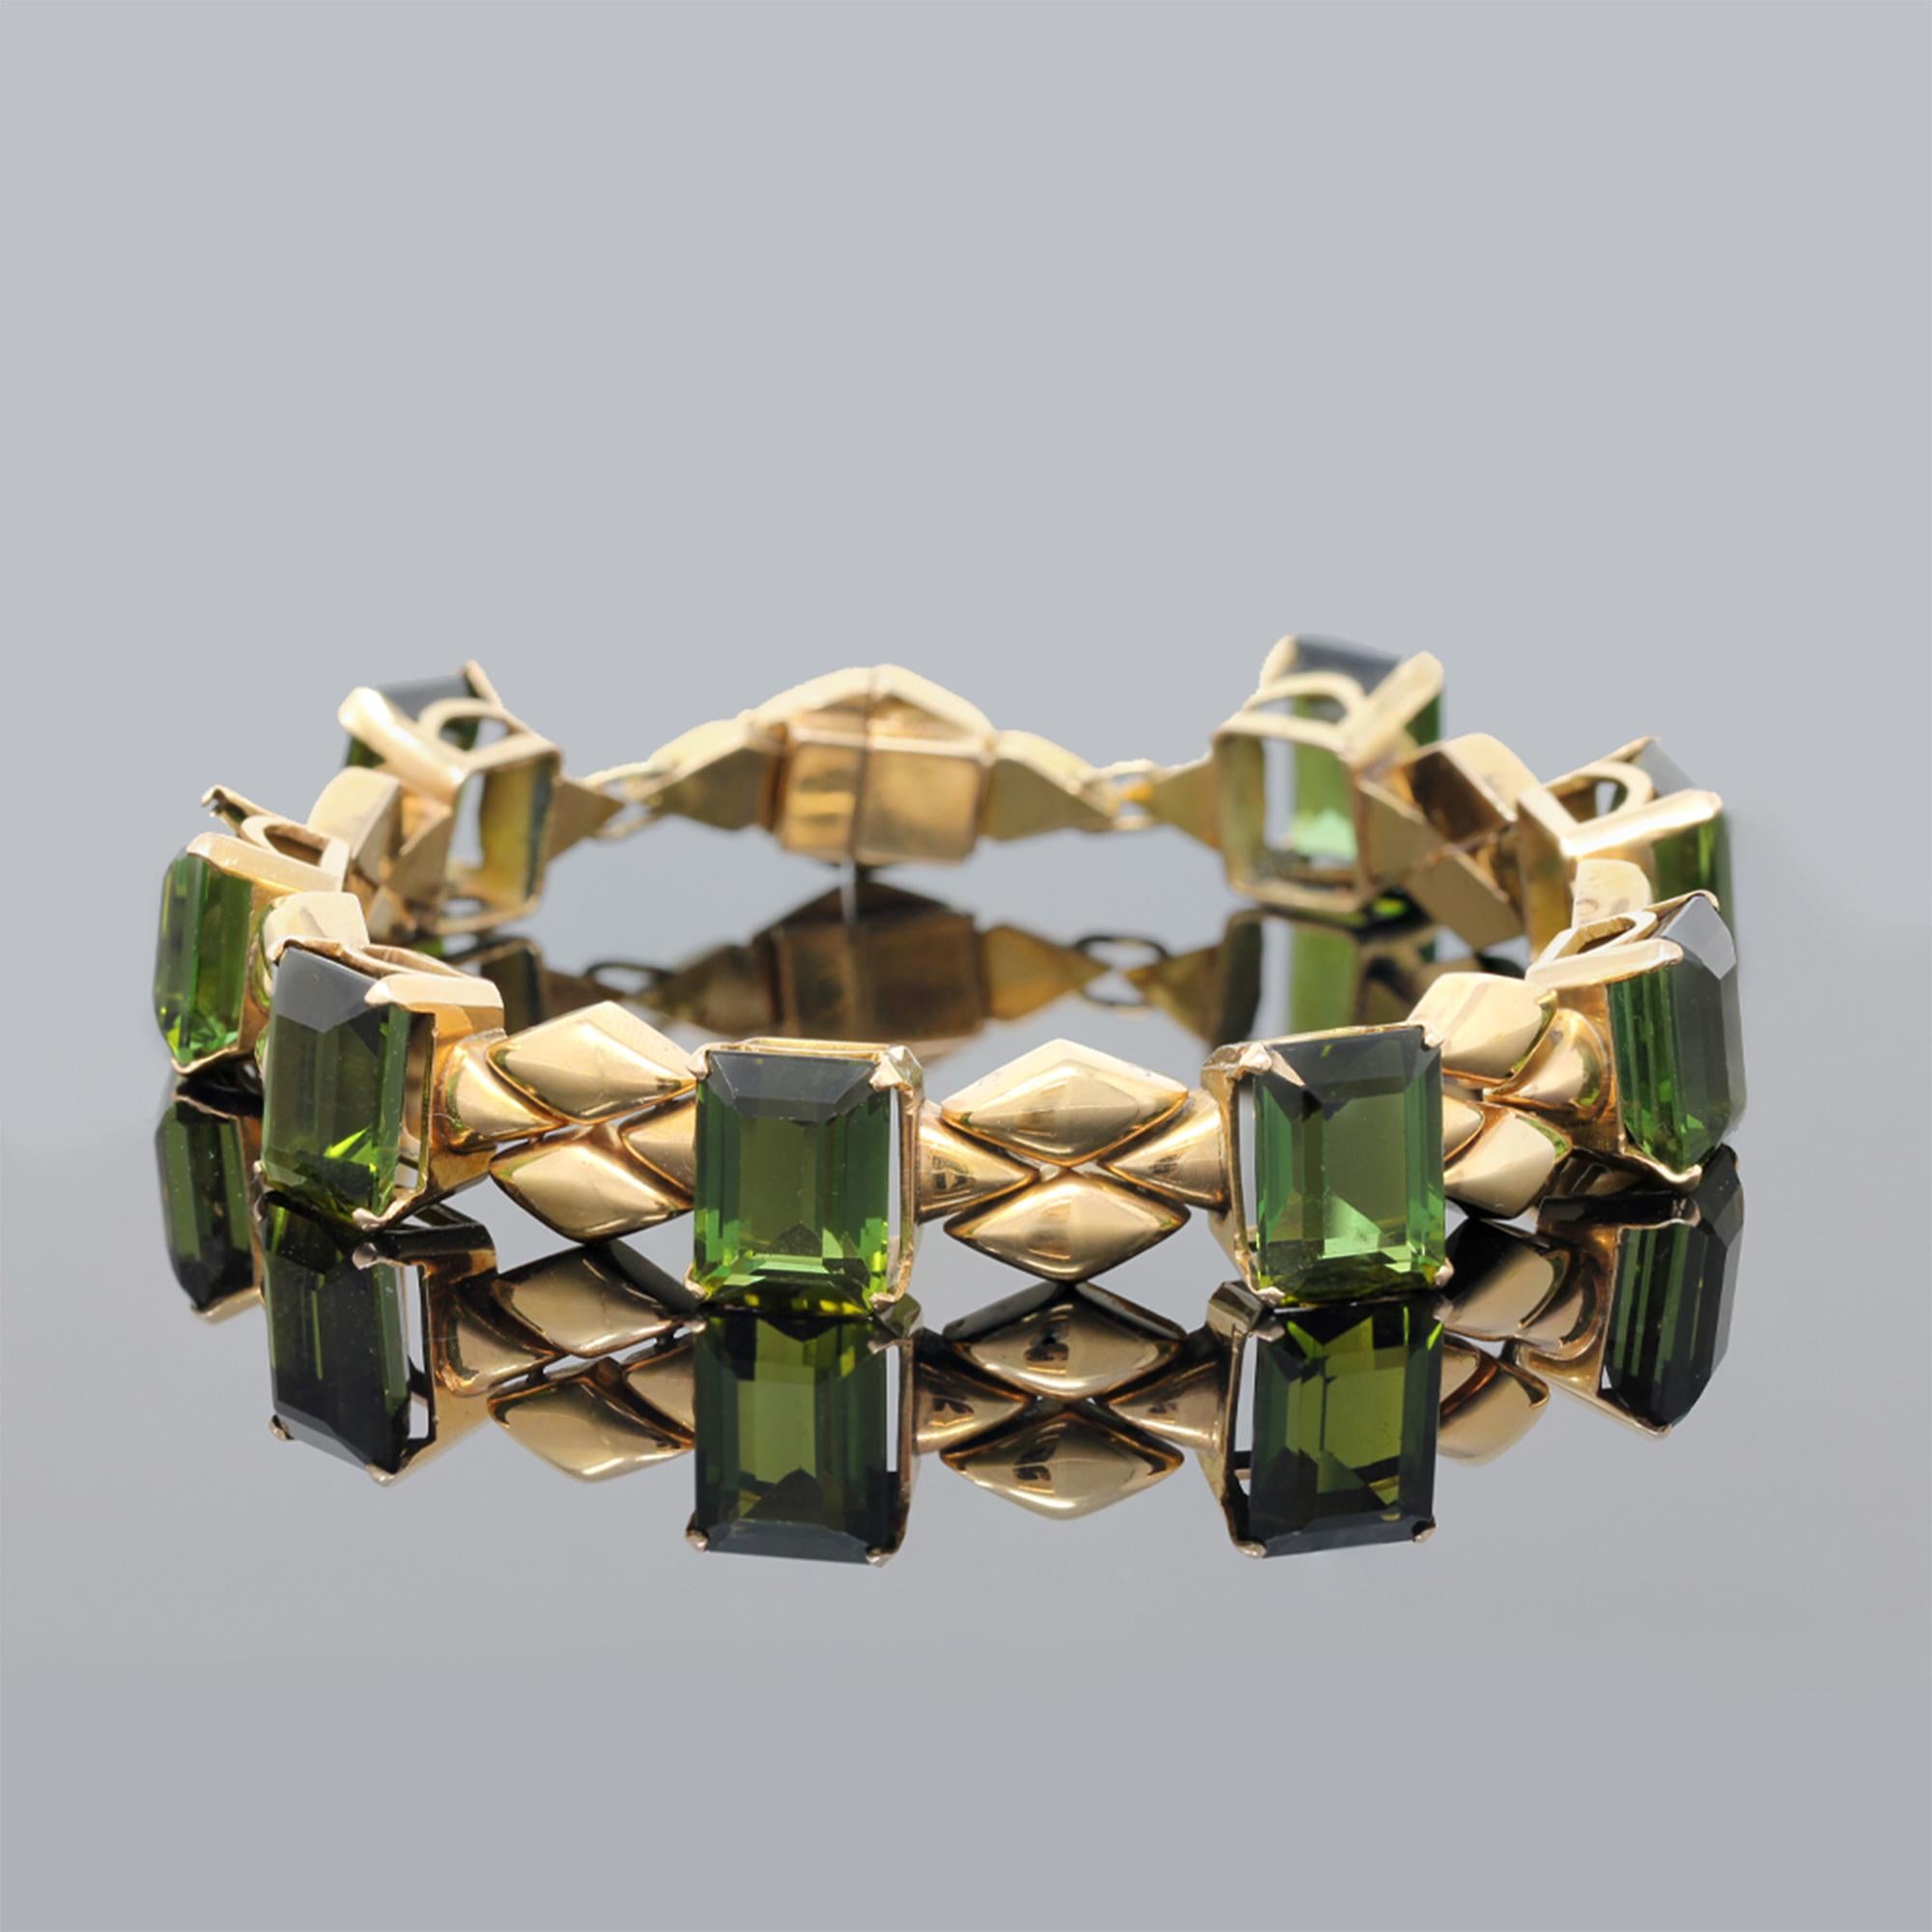 Retro 18 karat pink gold and tourmaline bracelet and earrings, the bracelet of polished pink gold lozenge-shaped links spaced by emerald-cut tourmalines weighing approximately 56.00 carats, gross weight 34.6 grams, length 8 inches, width ½ inch, the